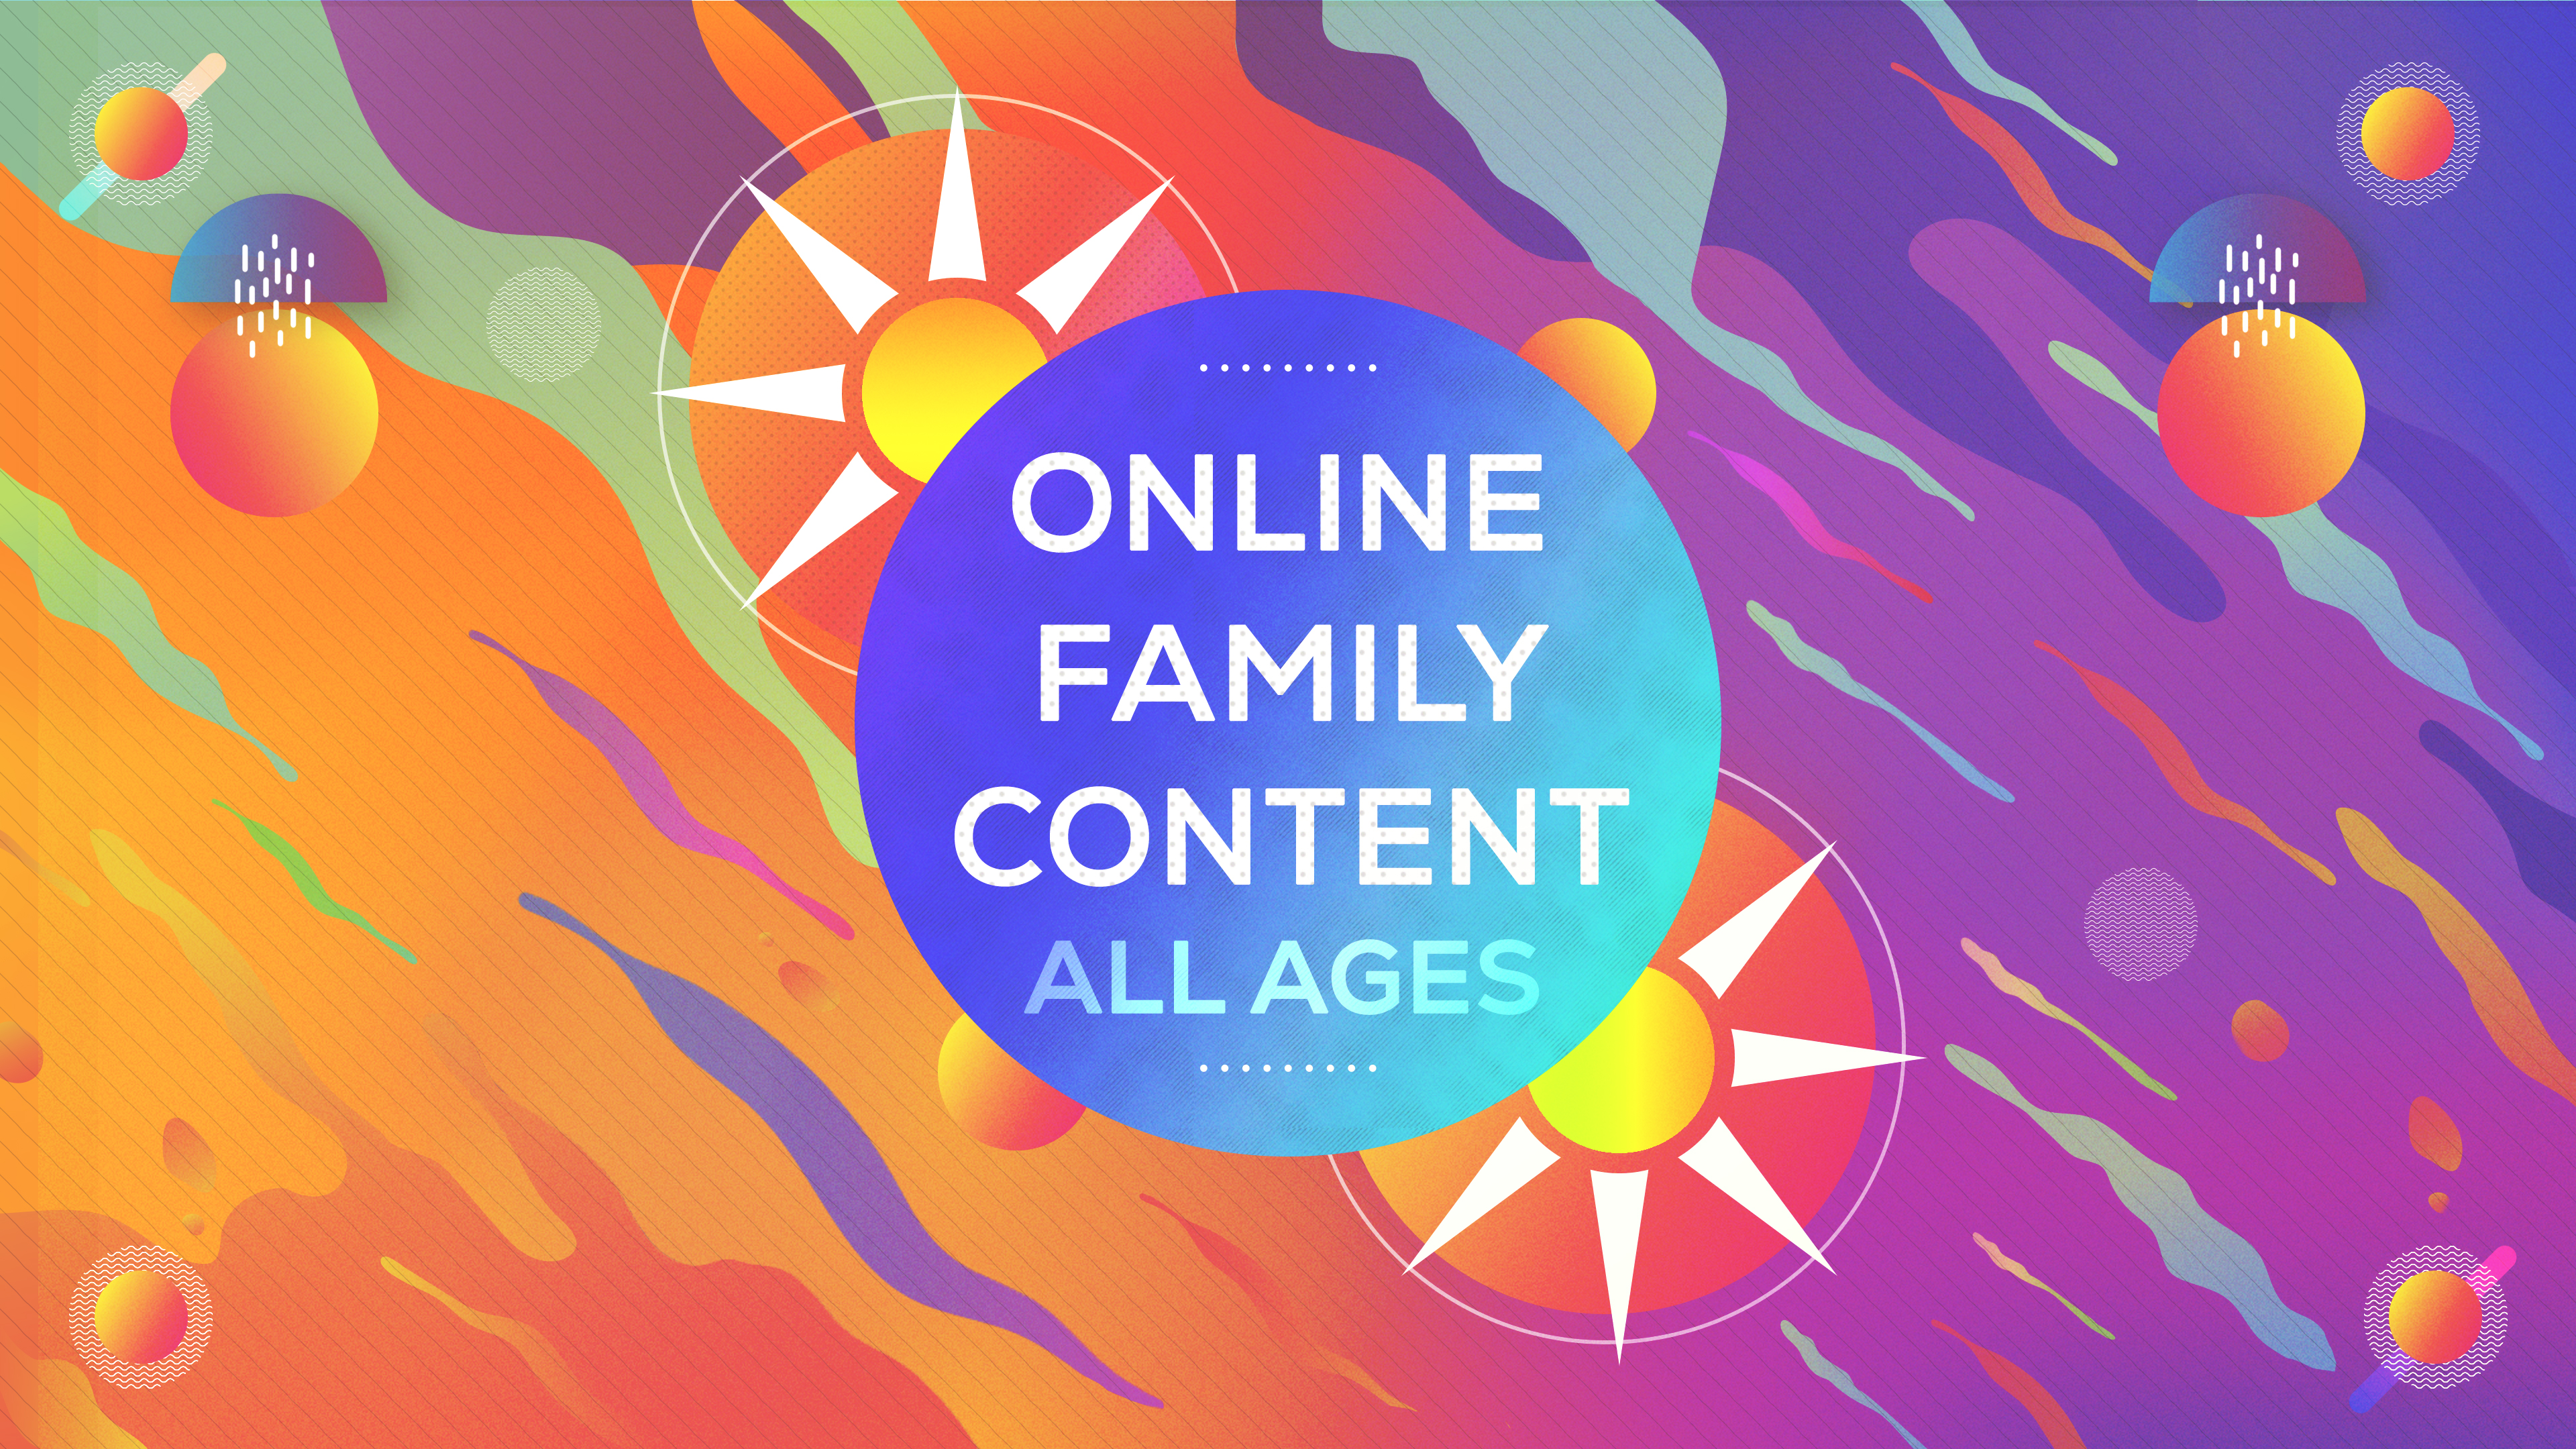 Online Family Content